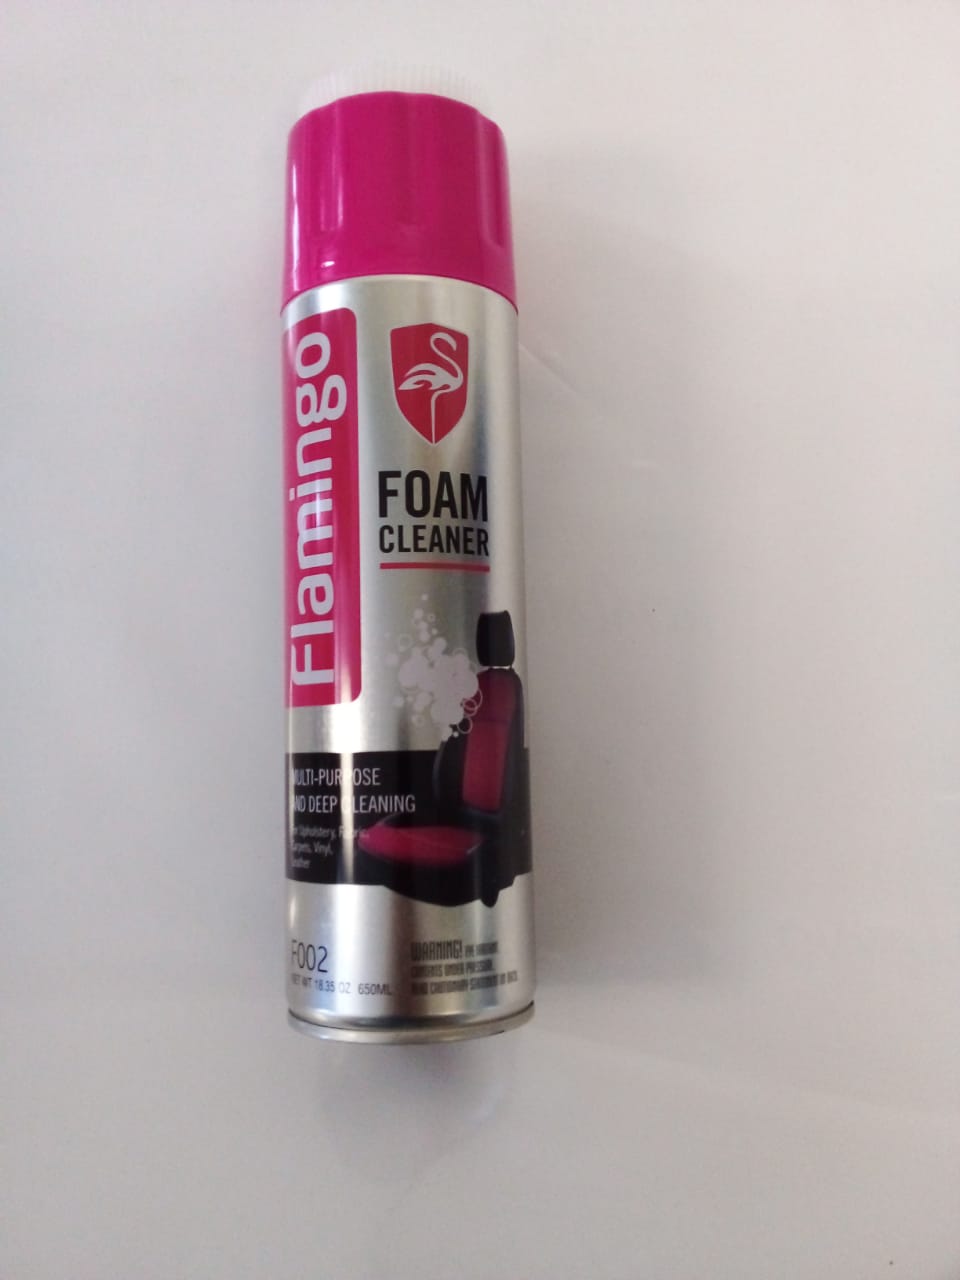 MultiFunctional Foam Cleaner Spray to Clean Car & House Lemon Scent